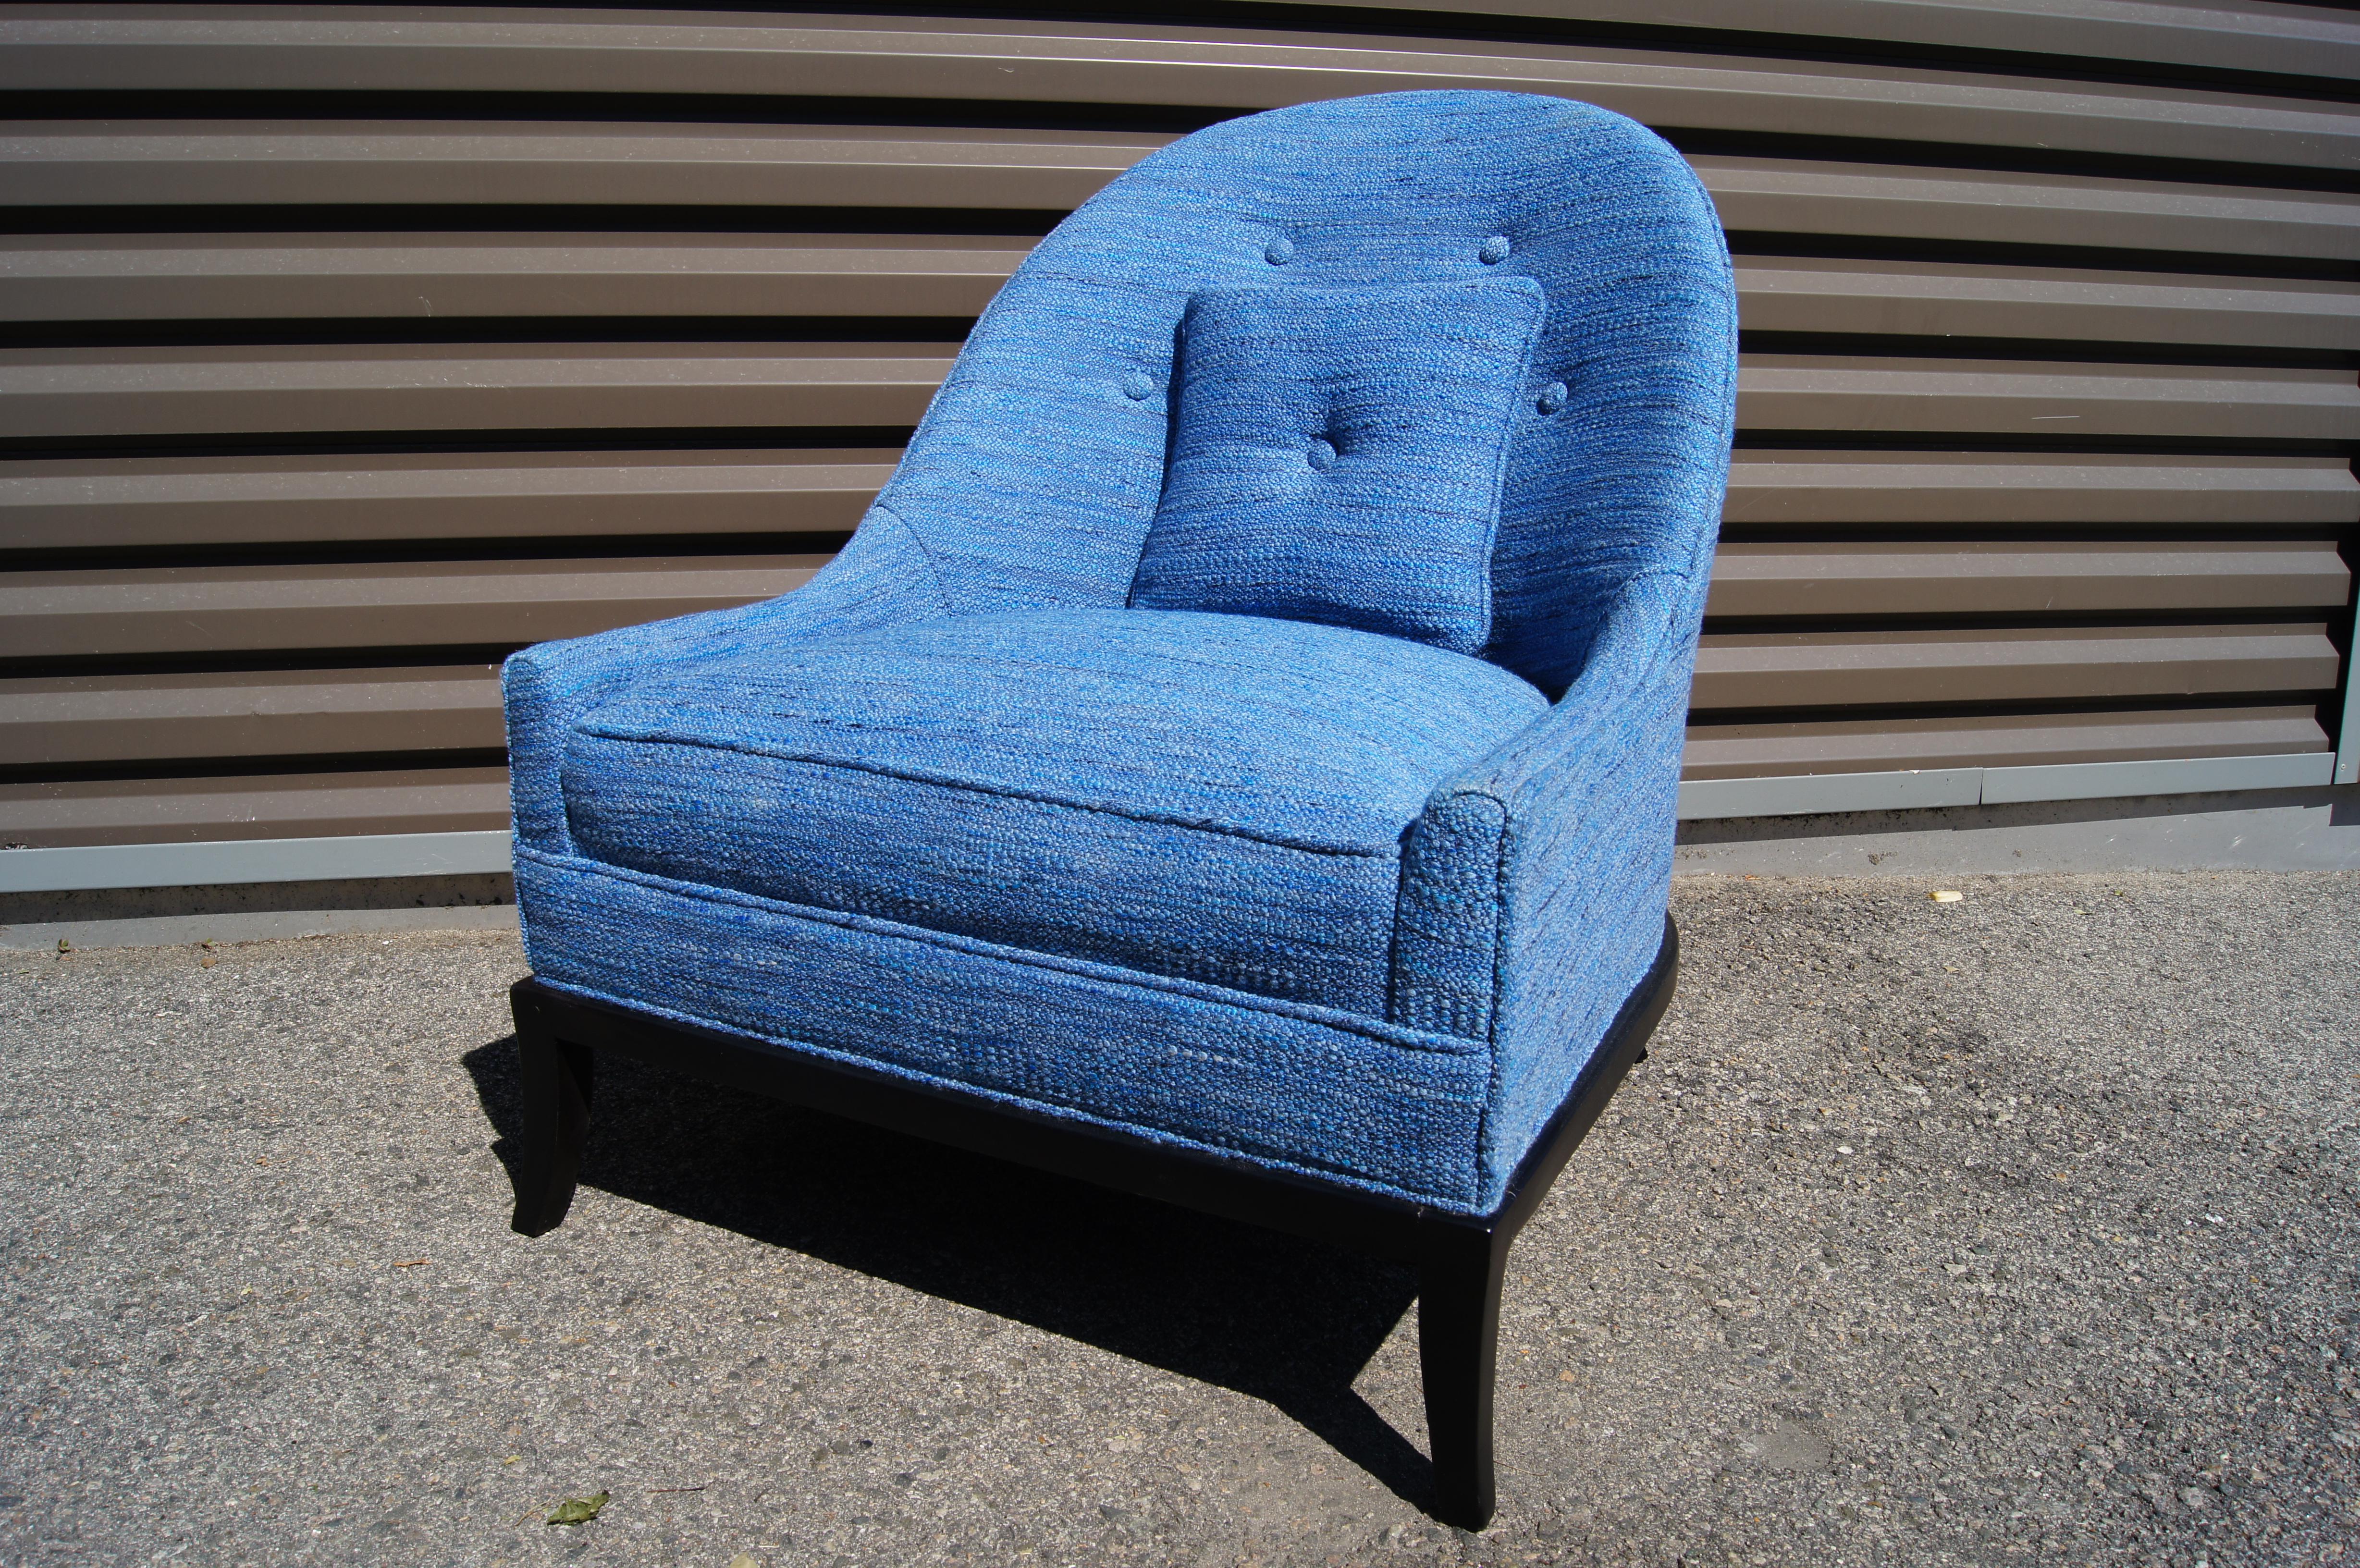 Designed by Robsjohn Gibbings model 2043, this comfortable armchair features a wide low seat and a curvaceous tufted back. The chair was previously reupholstered in Knoll's Rivington textile in Sapphire, K1080/2.